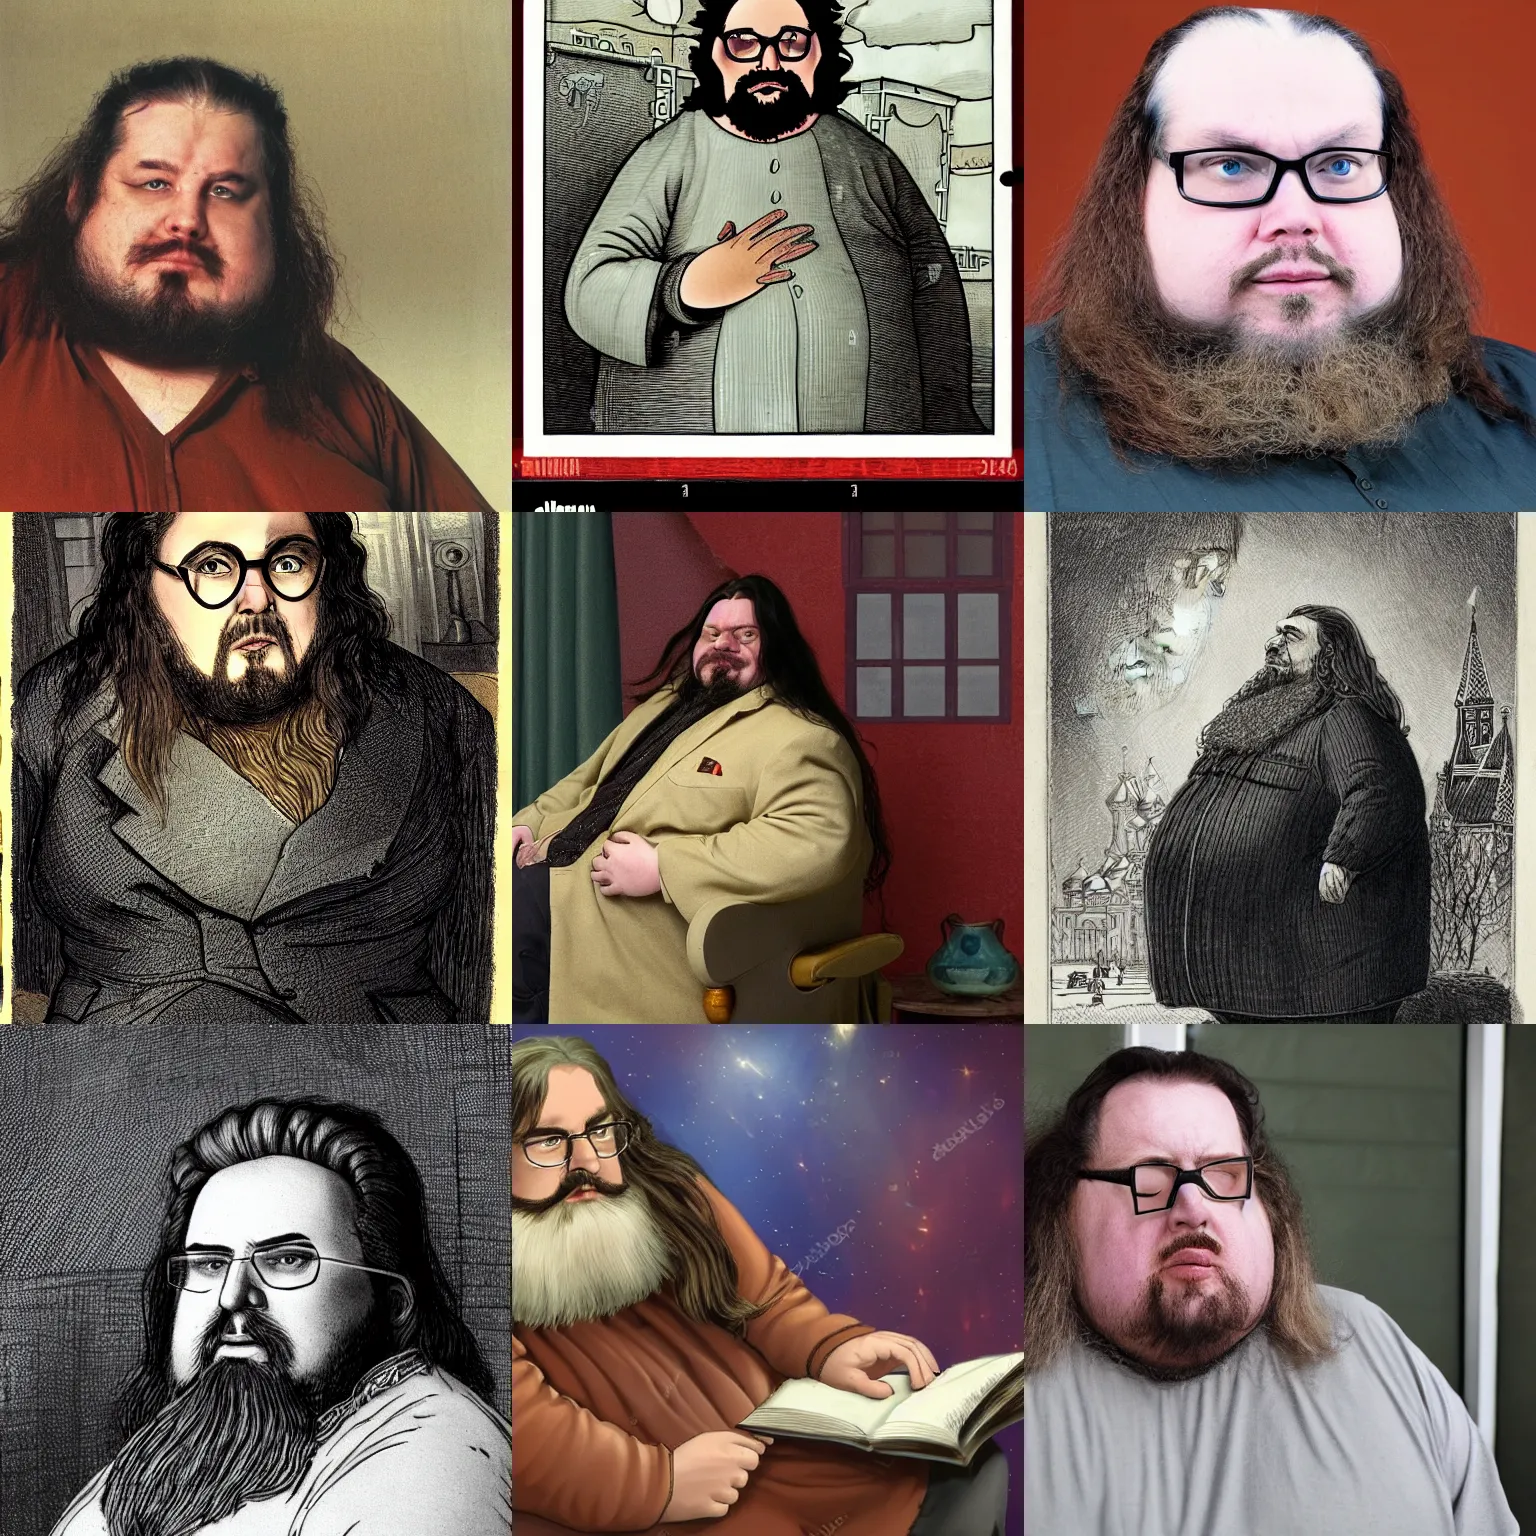 Prompt: obese russian long - haired bad sci - fi writer with goatee and glasses pretending himself as an emperor